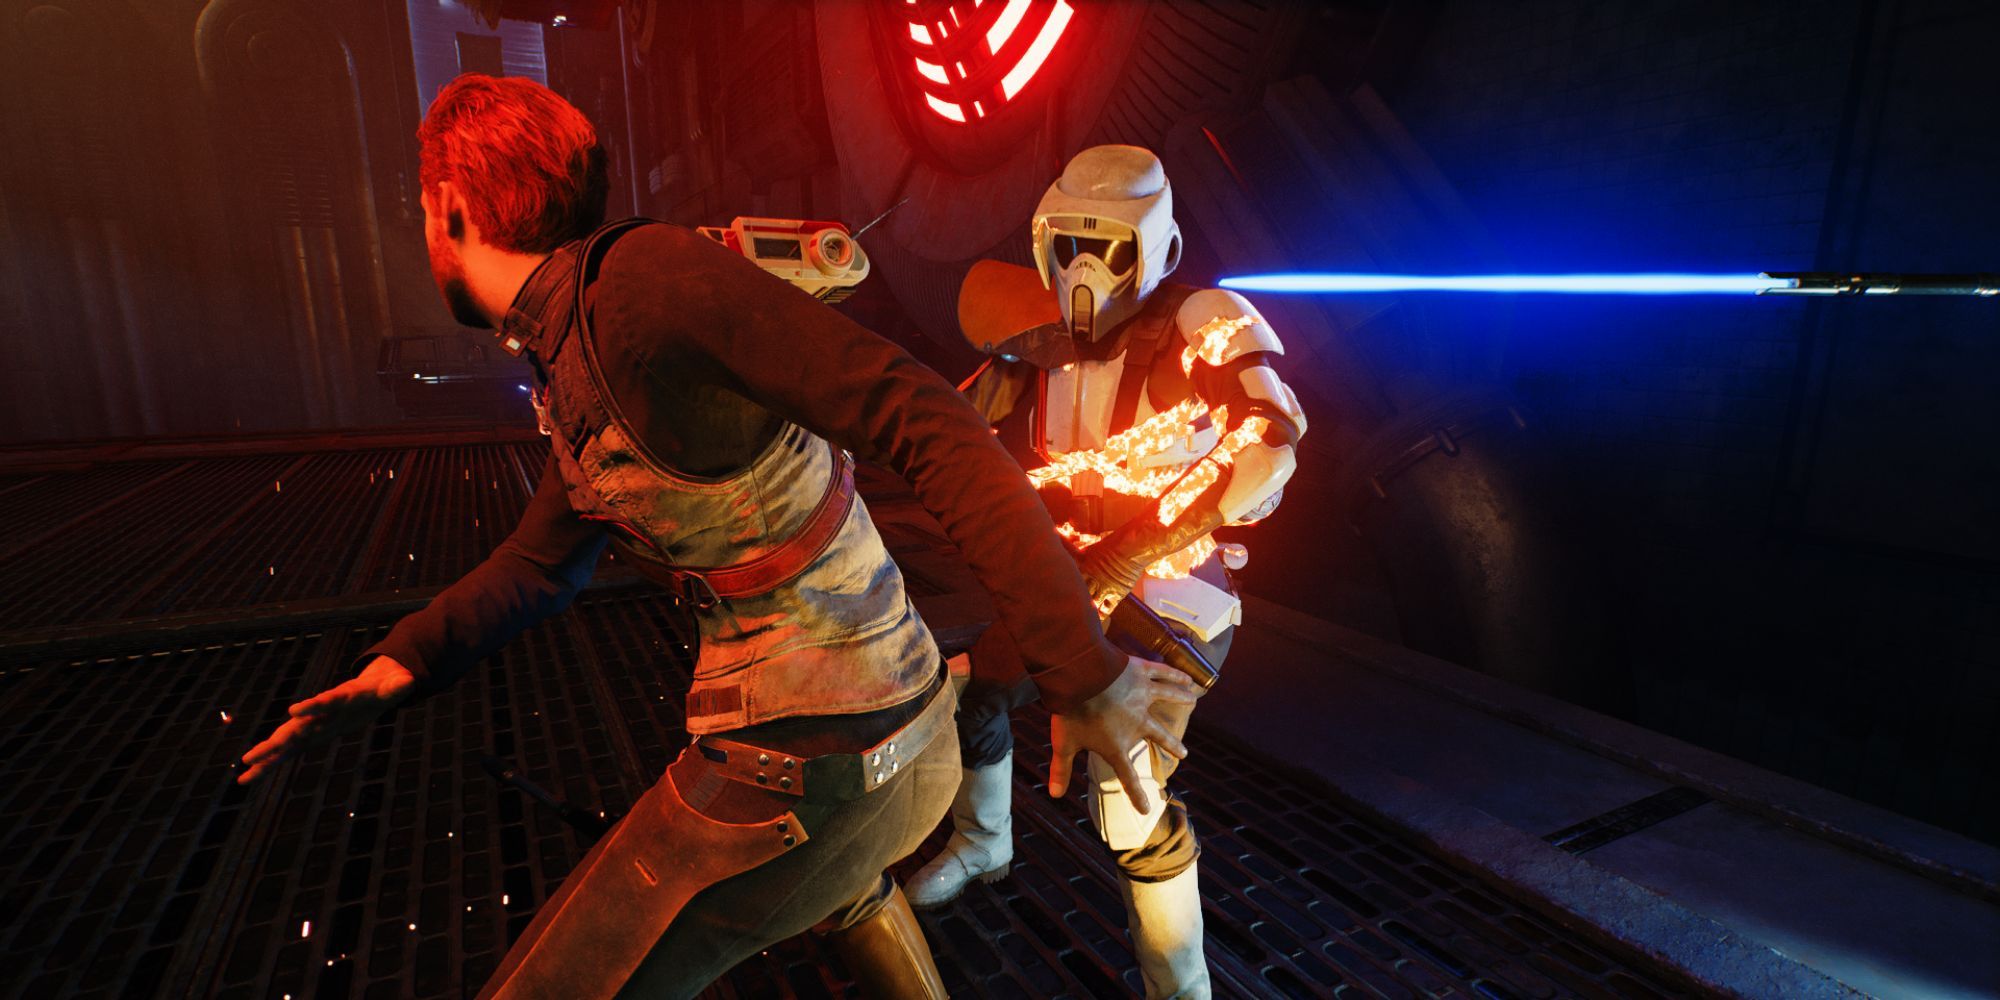 Cal slices through a stormtrooper's armor by throwing his lightsaber forward in a spin